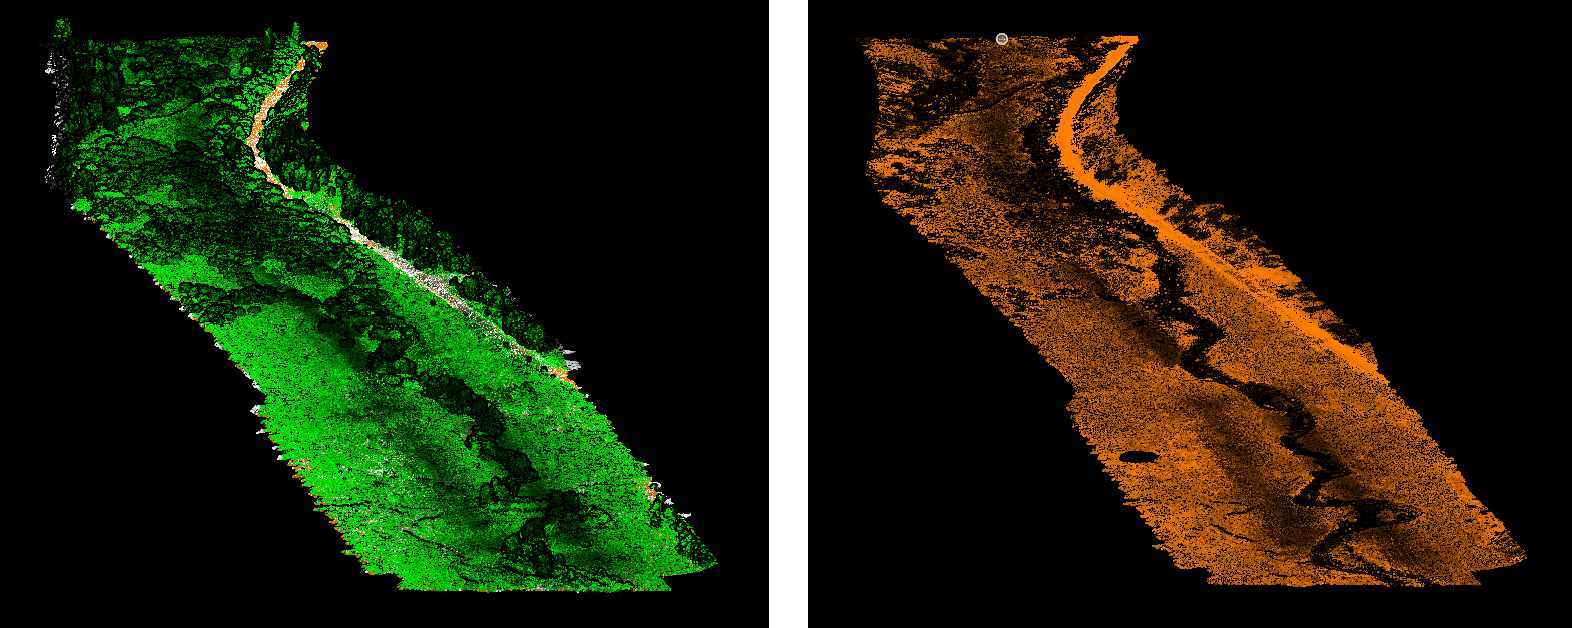 Side-by-side visualization of point clouds collected by UAS- one that includes the area including vegetation, and a second of the same area, where the vegetation has been removed, showing topography only.